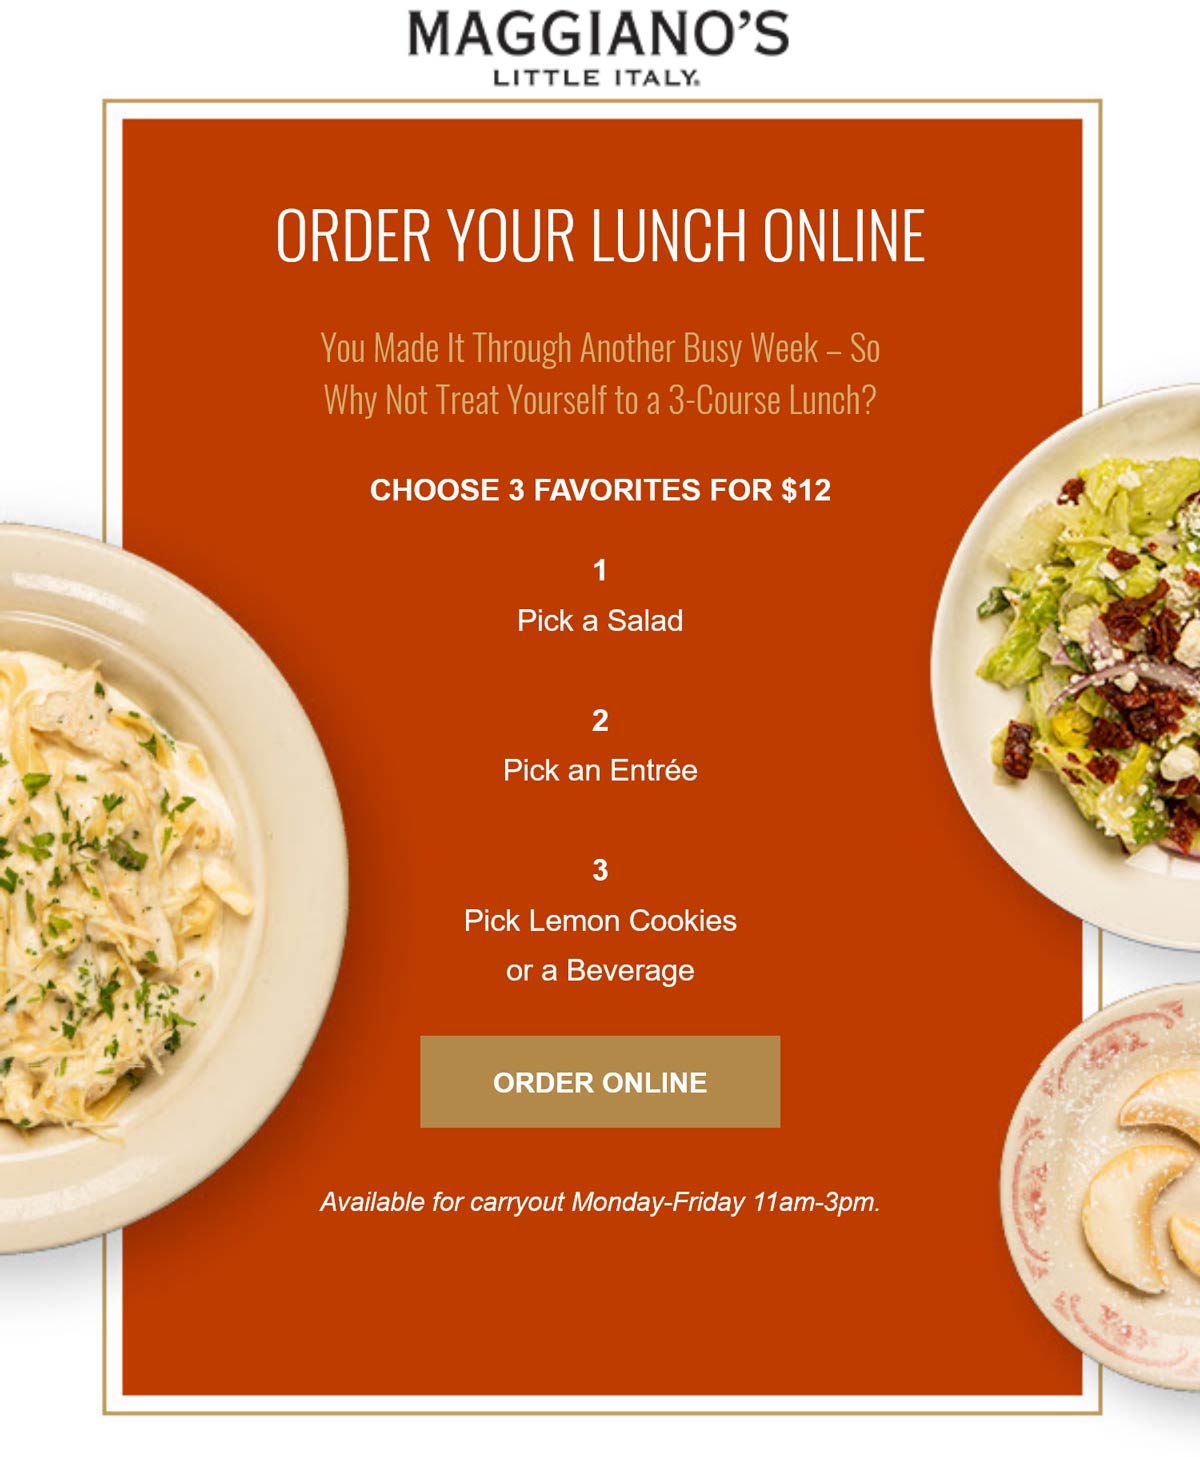 Maggianos Little Italy restaurants Coupon  Salad + lunch entree + beverage or cookies = $12 weekdays til 3p at Maggianos Little Italy #maggianoslittleitaly 